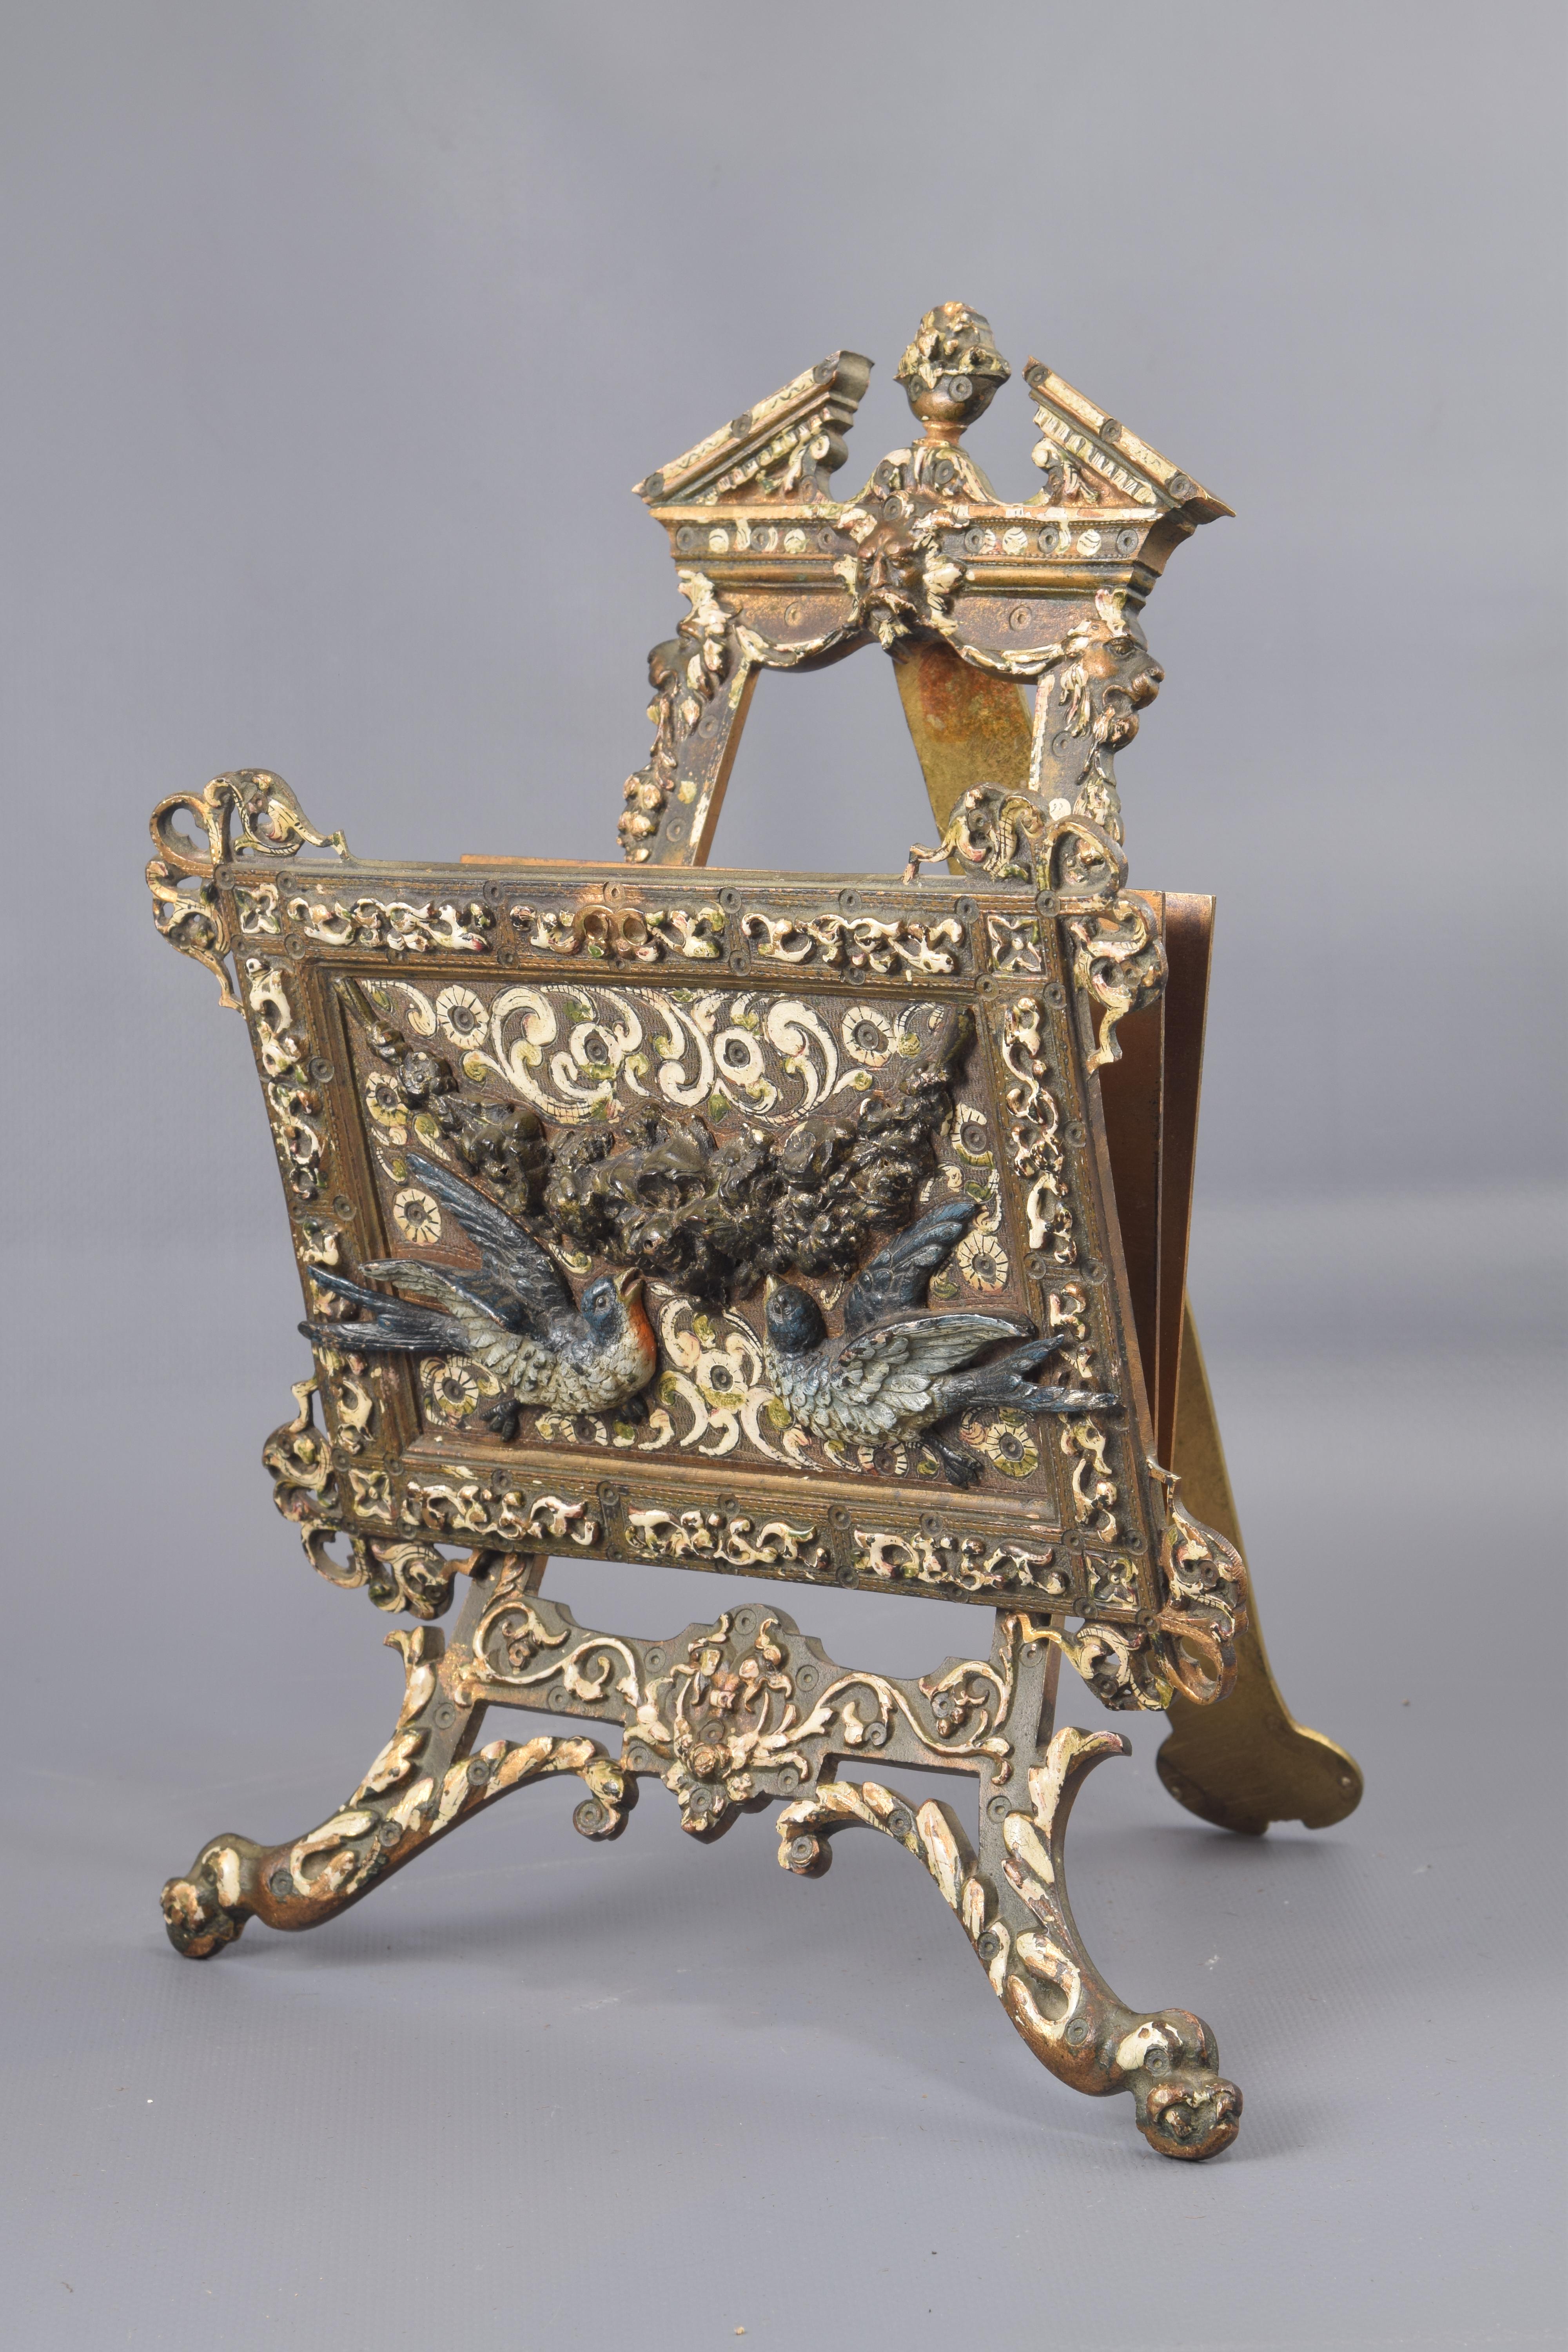 Letter holder polychrome bronze, Vienna, 19th century
Polychrome bronze card holder in the shape of a lectern decorated with elements of strong classical influence (and memory of the Renaissance and Mannerism) holding a folder, decorated in what